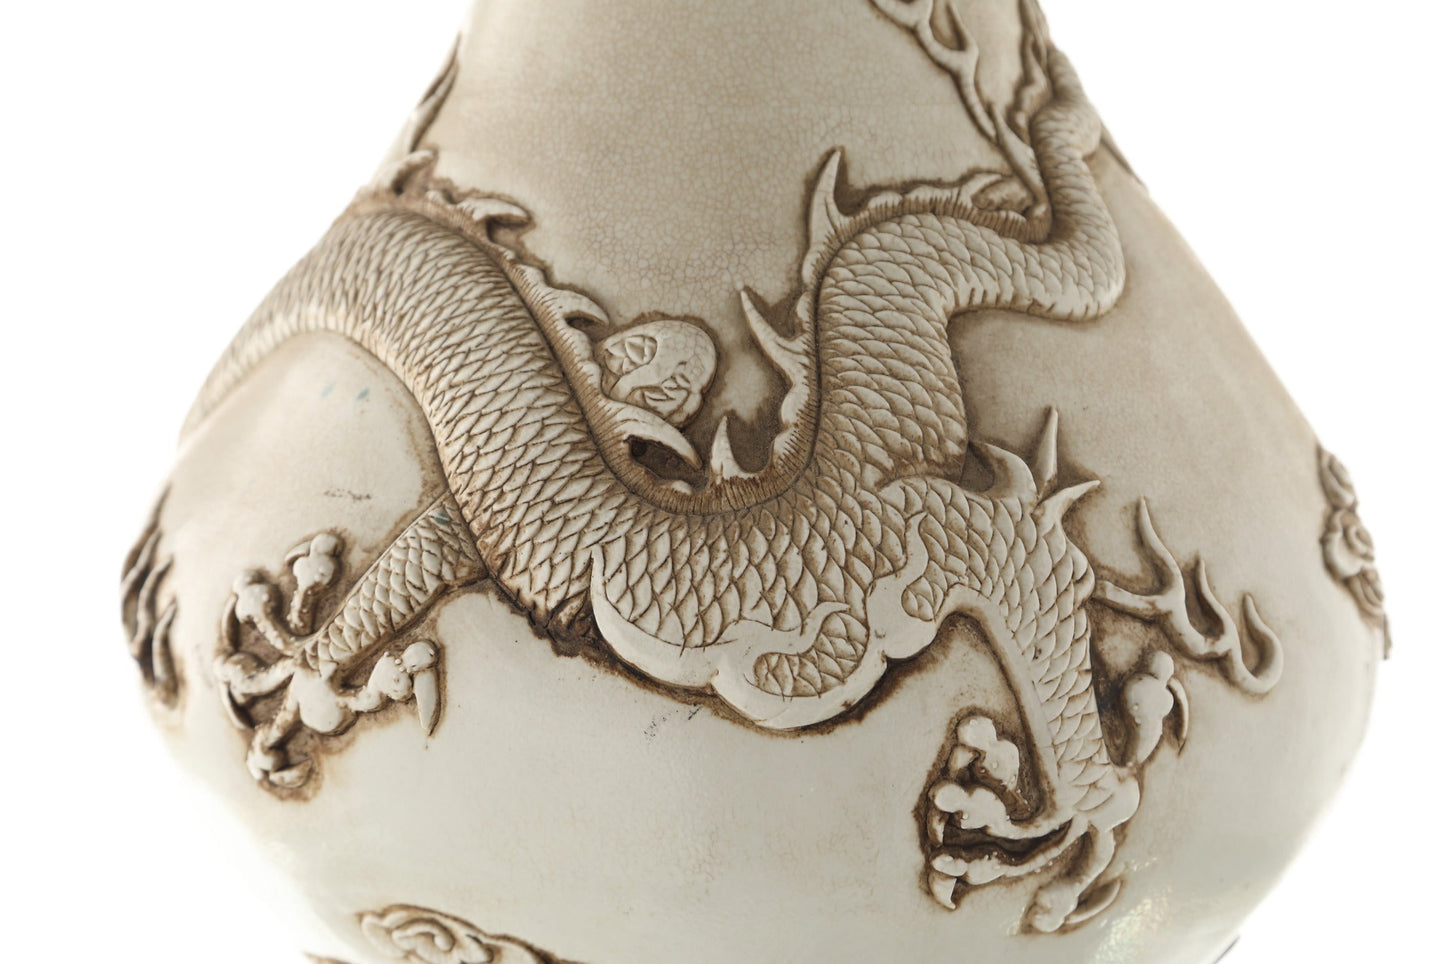 Chinese vase from the early 1900s